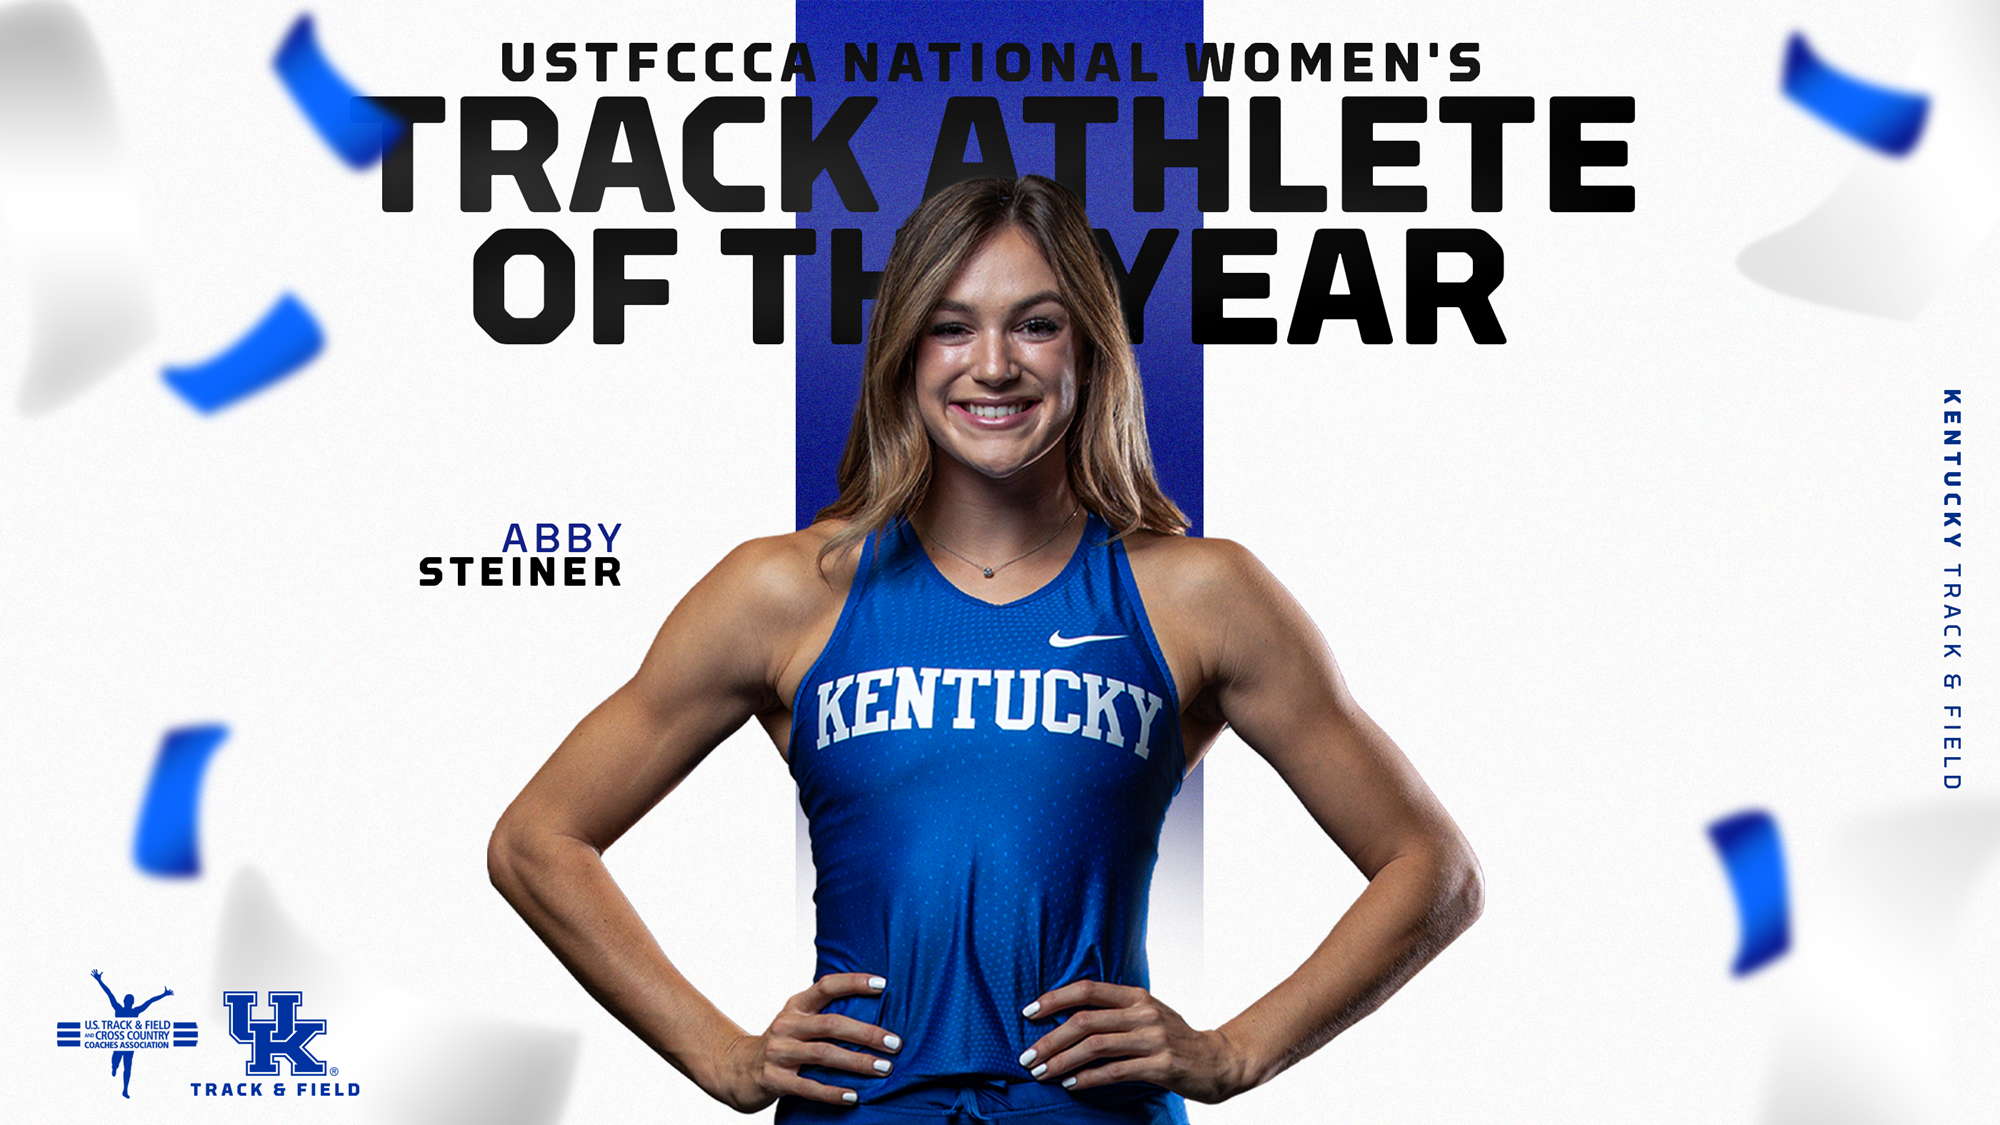 Abby Steiner named National Women’s Track Athlete of the Year by USTFCCCA